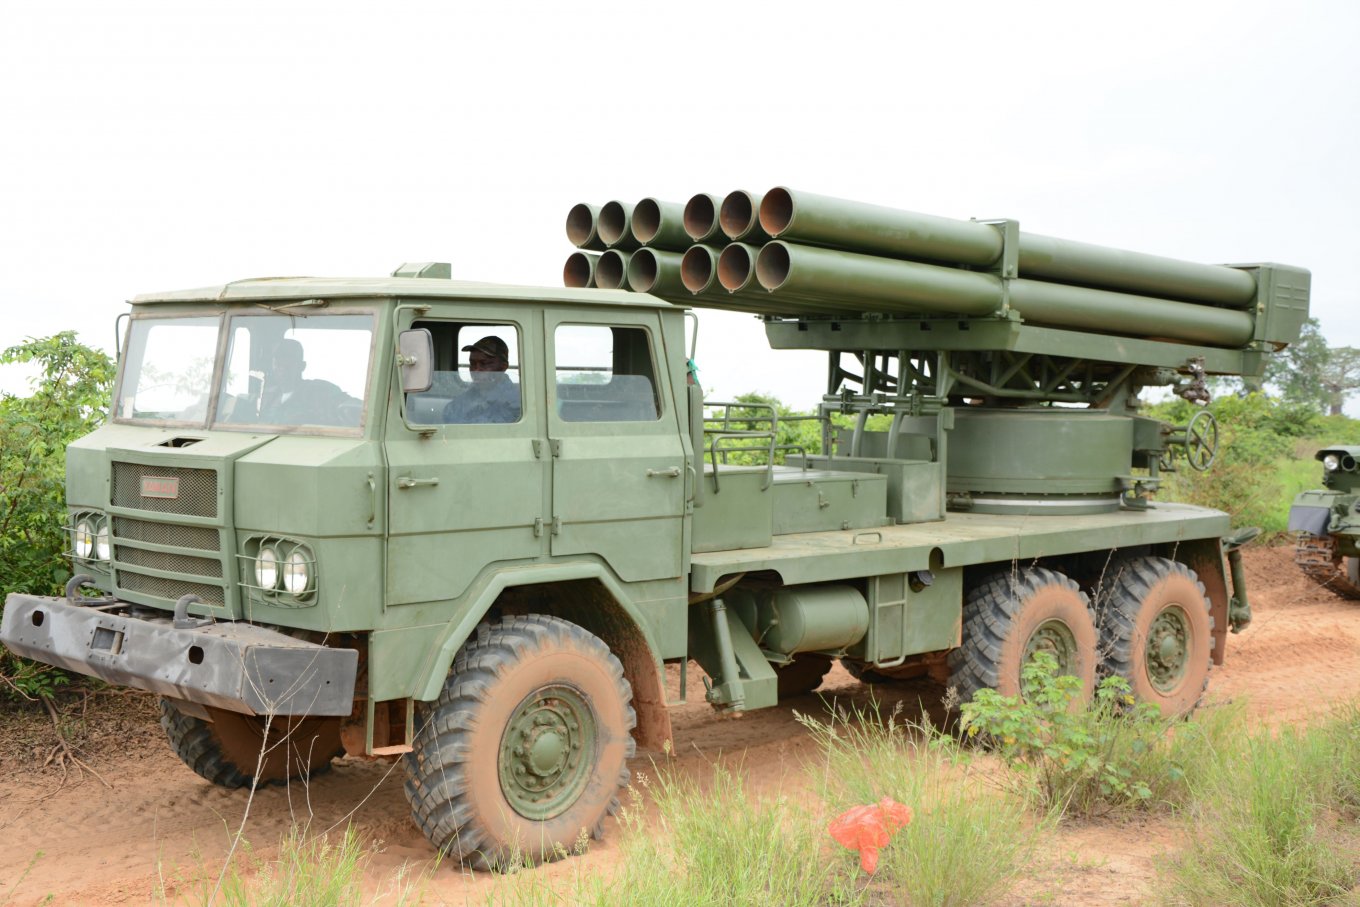 RM-70 Vampire MLRS (probably a simplified version) of the Armed Forces of Angola/ Illustrative photo from open sources, Angola Wants to Be the US Ally, Its Excess Soviet Weapons Can Help the Armed Forces of Ukraine, Defense Express